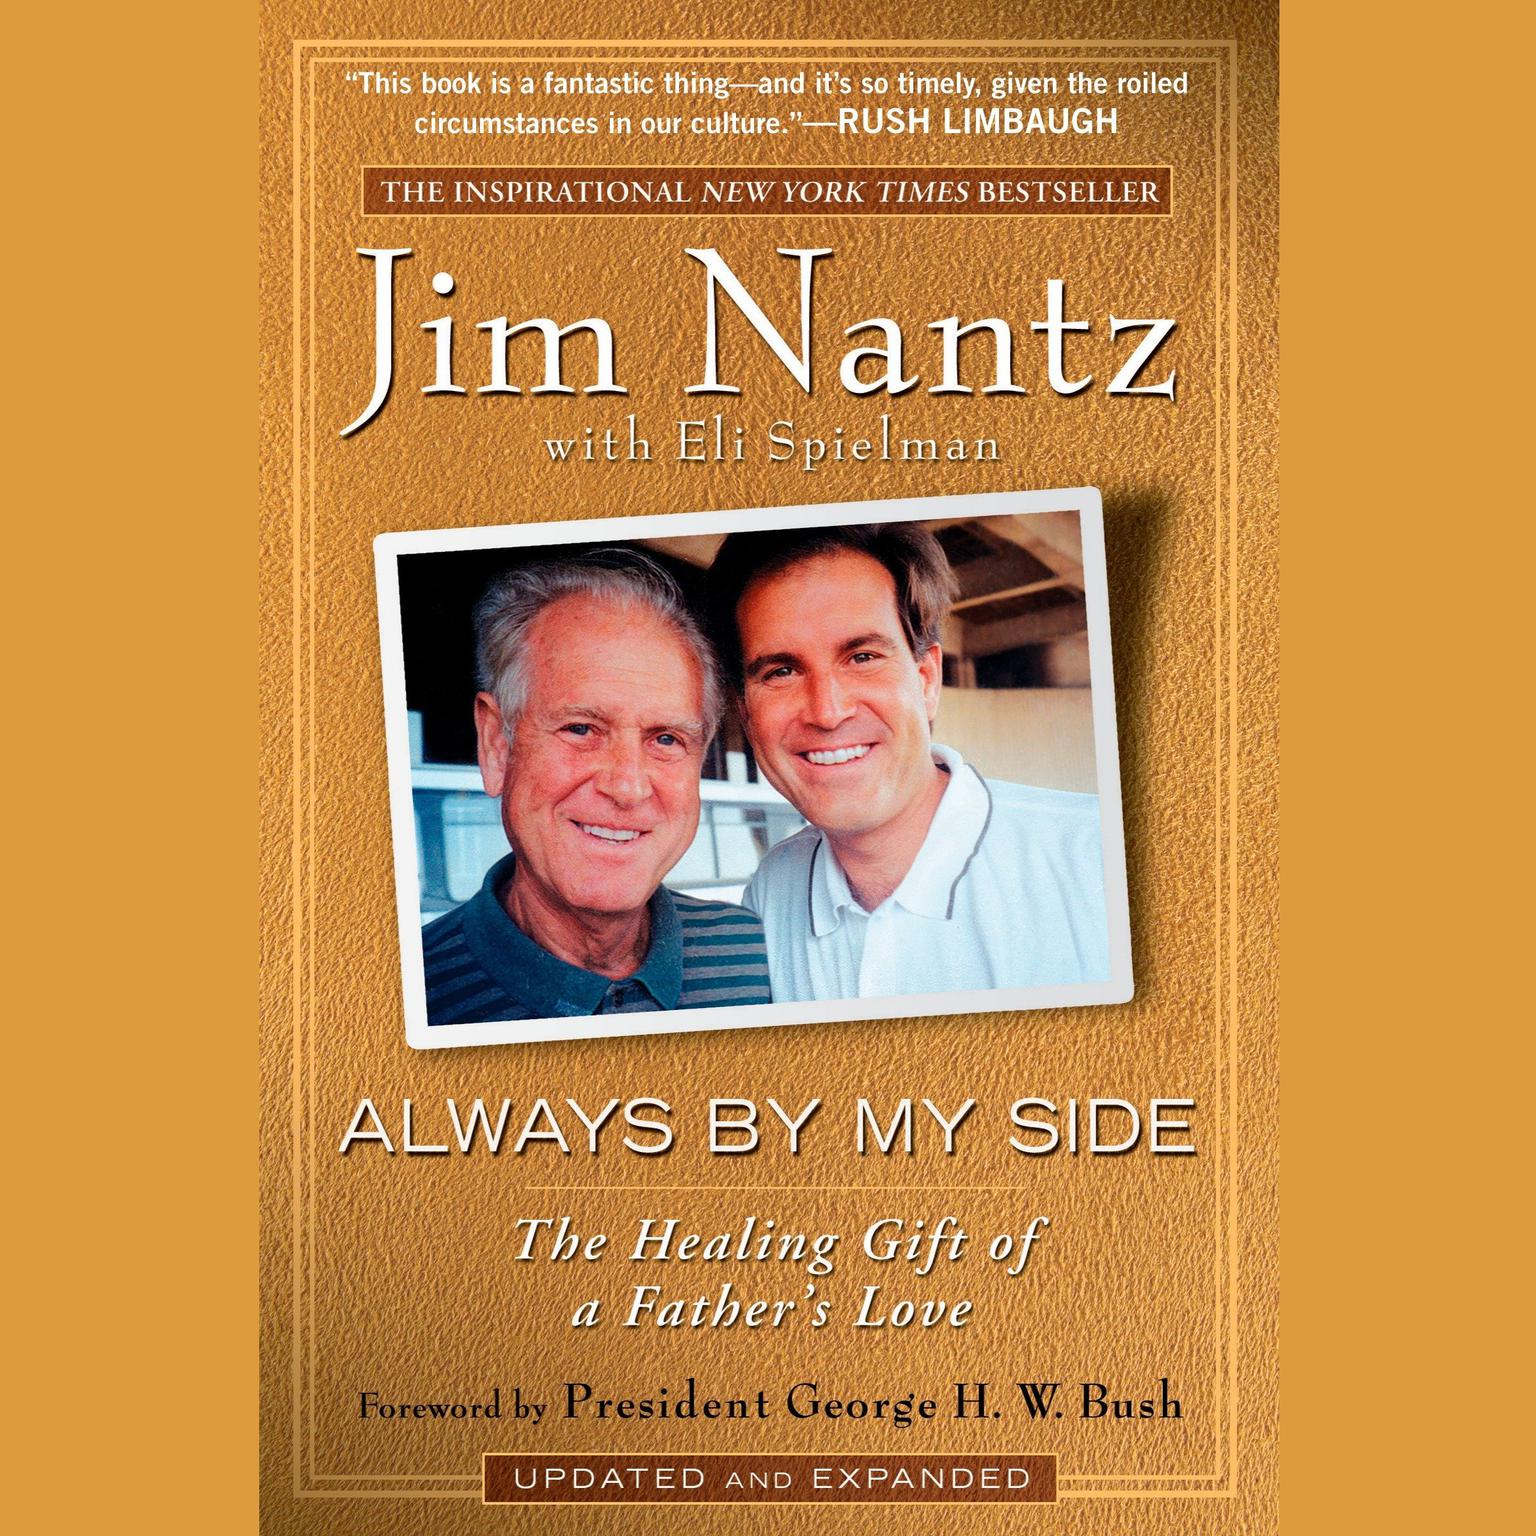 Always By My Side (Abridged): A Father’s Grace and a Sports Journey unlike Any Other Audiobook, by Jim Nantz